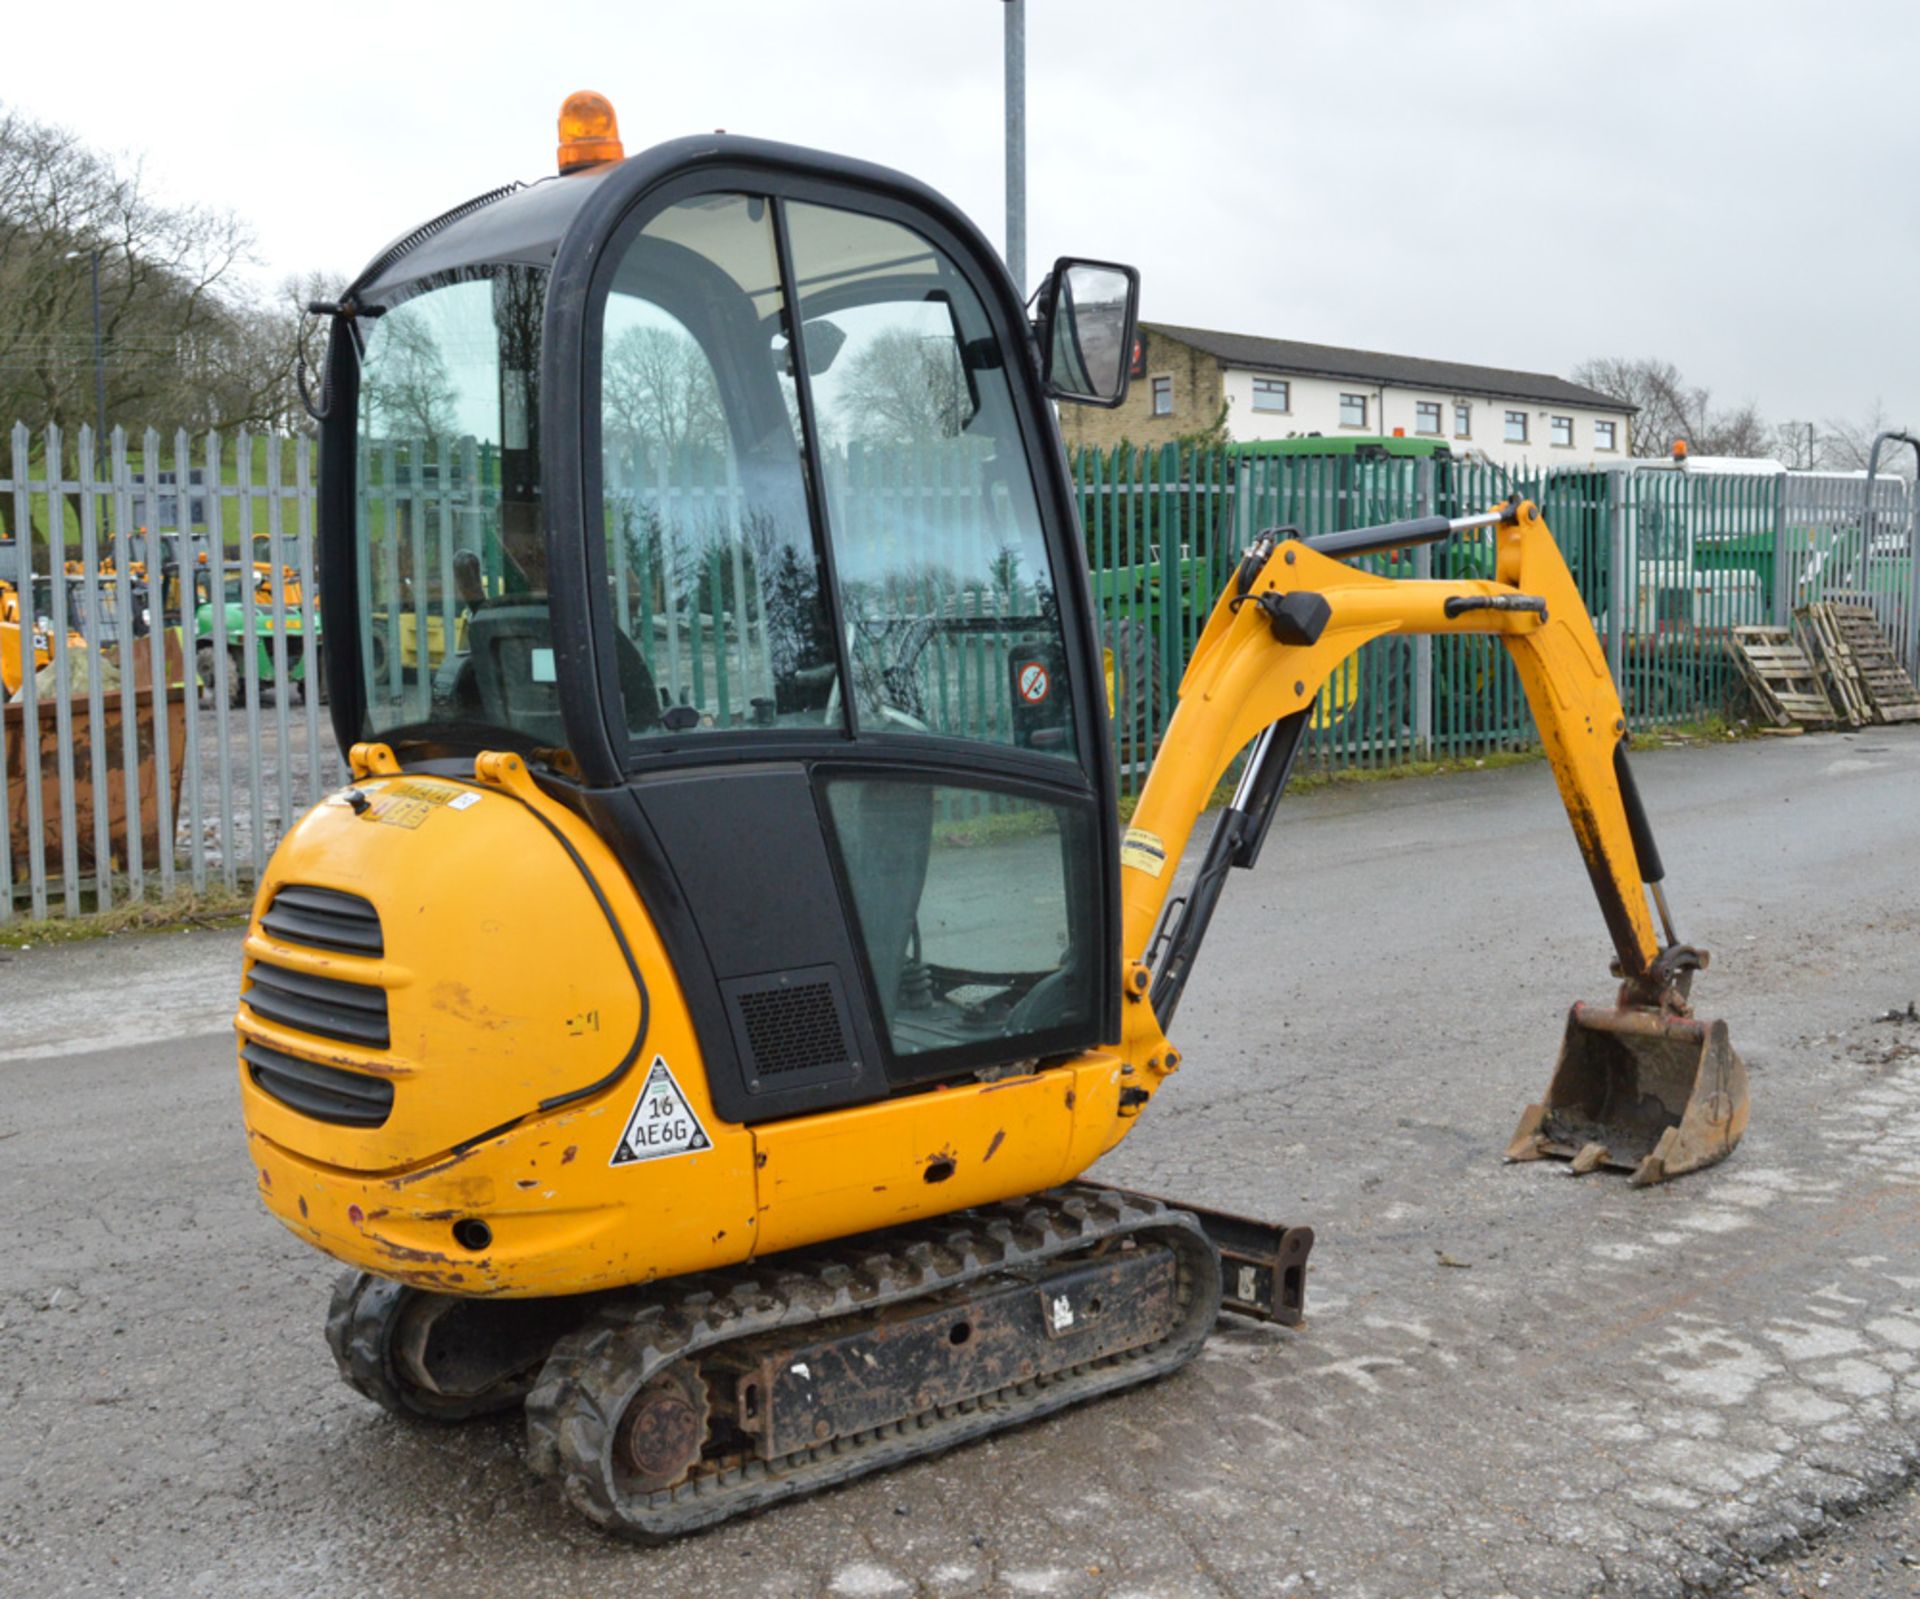 JCB 801.6 1.5 tonne rubber tracked mini excavator Year: 2011 S/N: 1703910 Recorded Hours: 1501 - Image 3 of 11